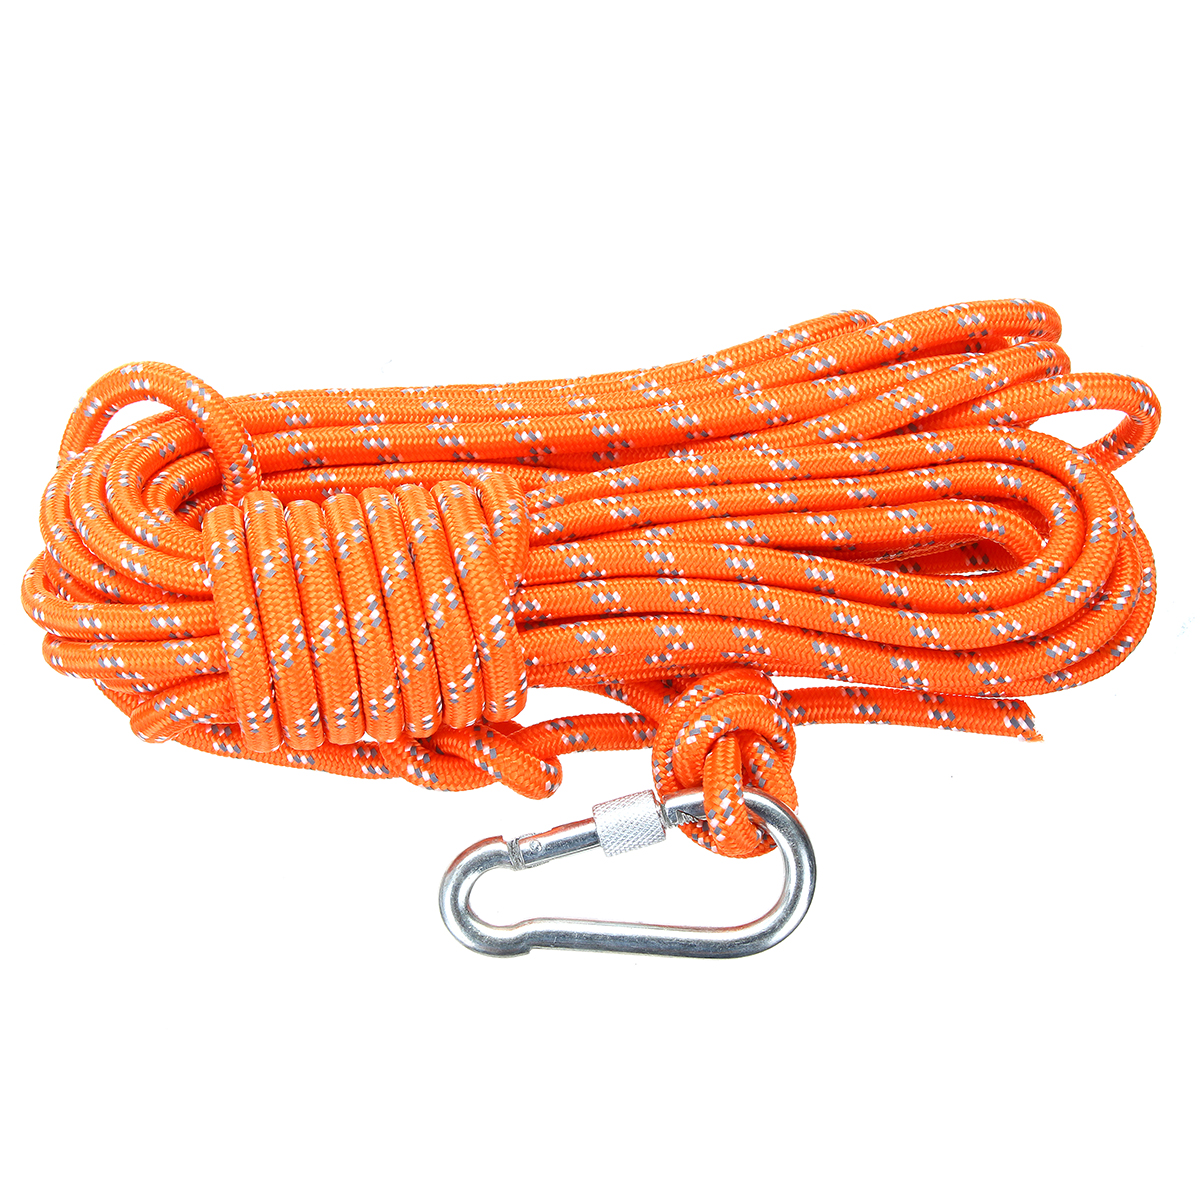 Outdoor-Climbing-Rope-8MM-Diameter-10M32ft-Escape-Rope-With-Hook-Fire-Rescue-Parachute-Rope-Climbing-1639384-1